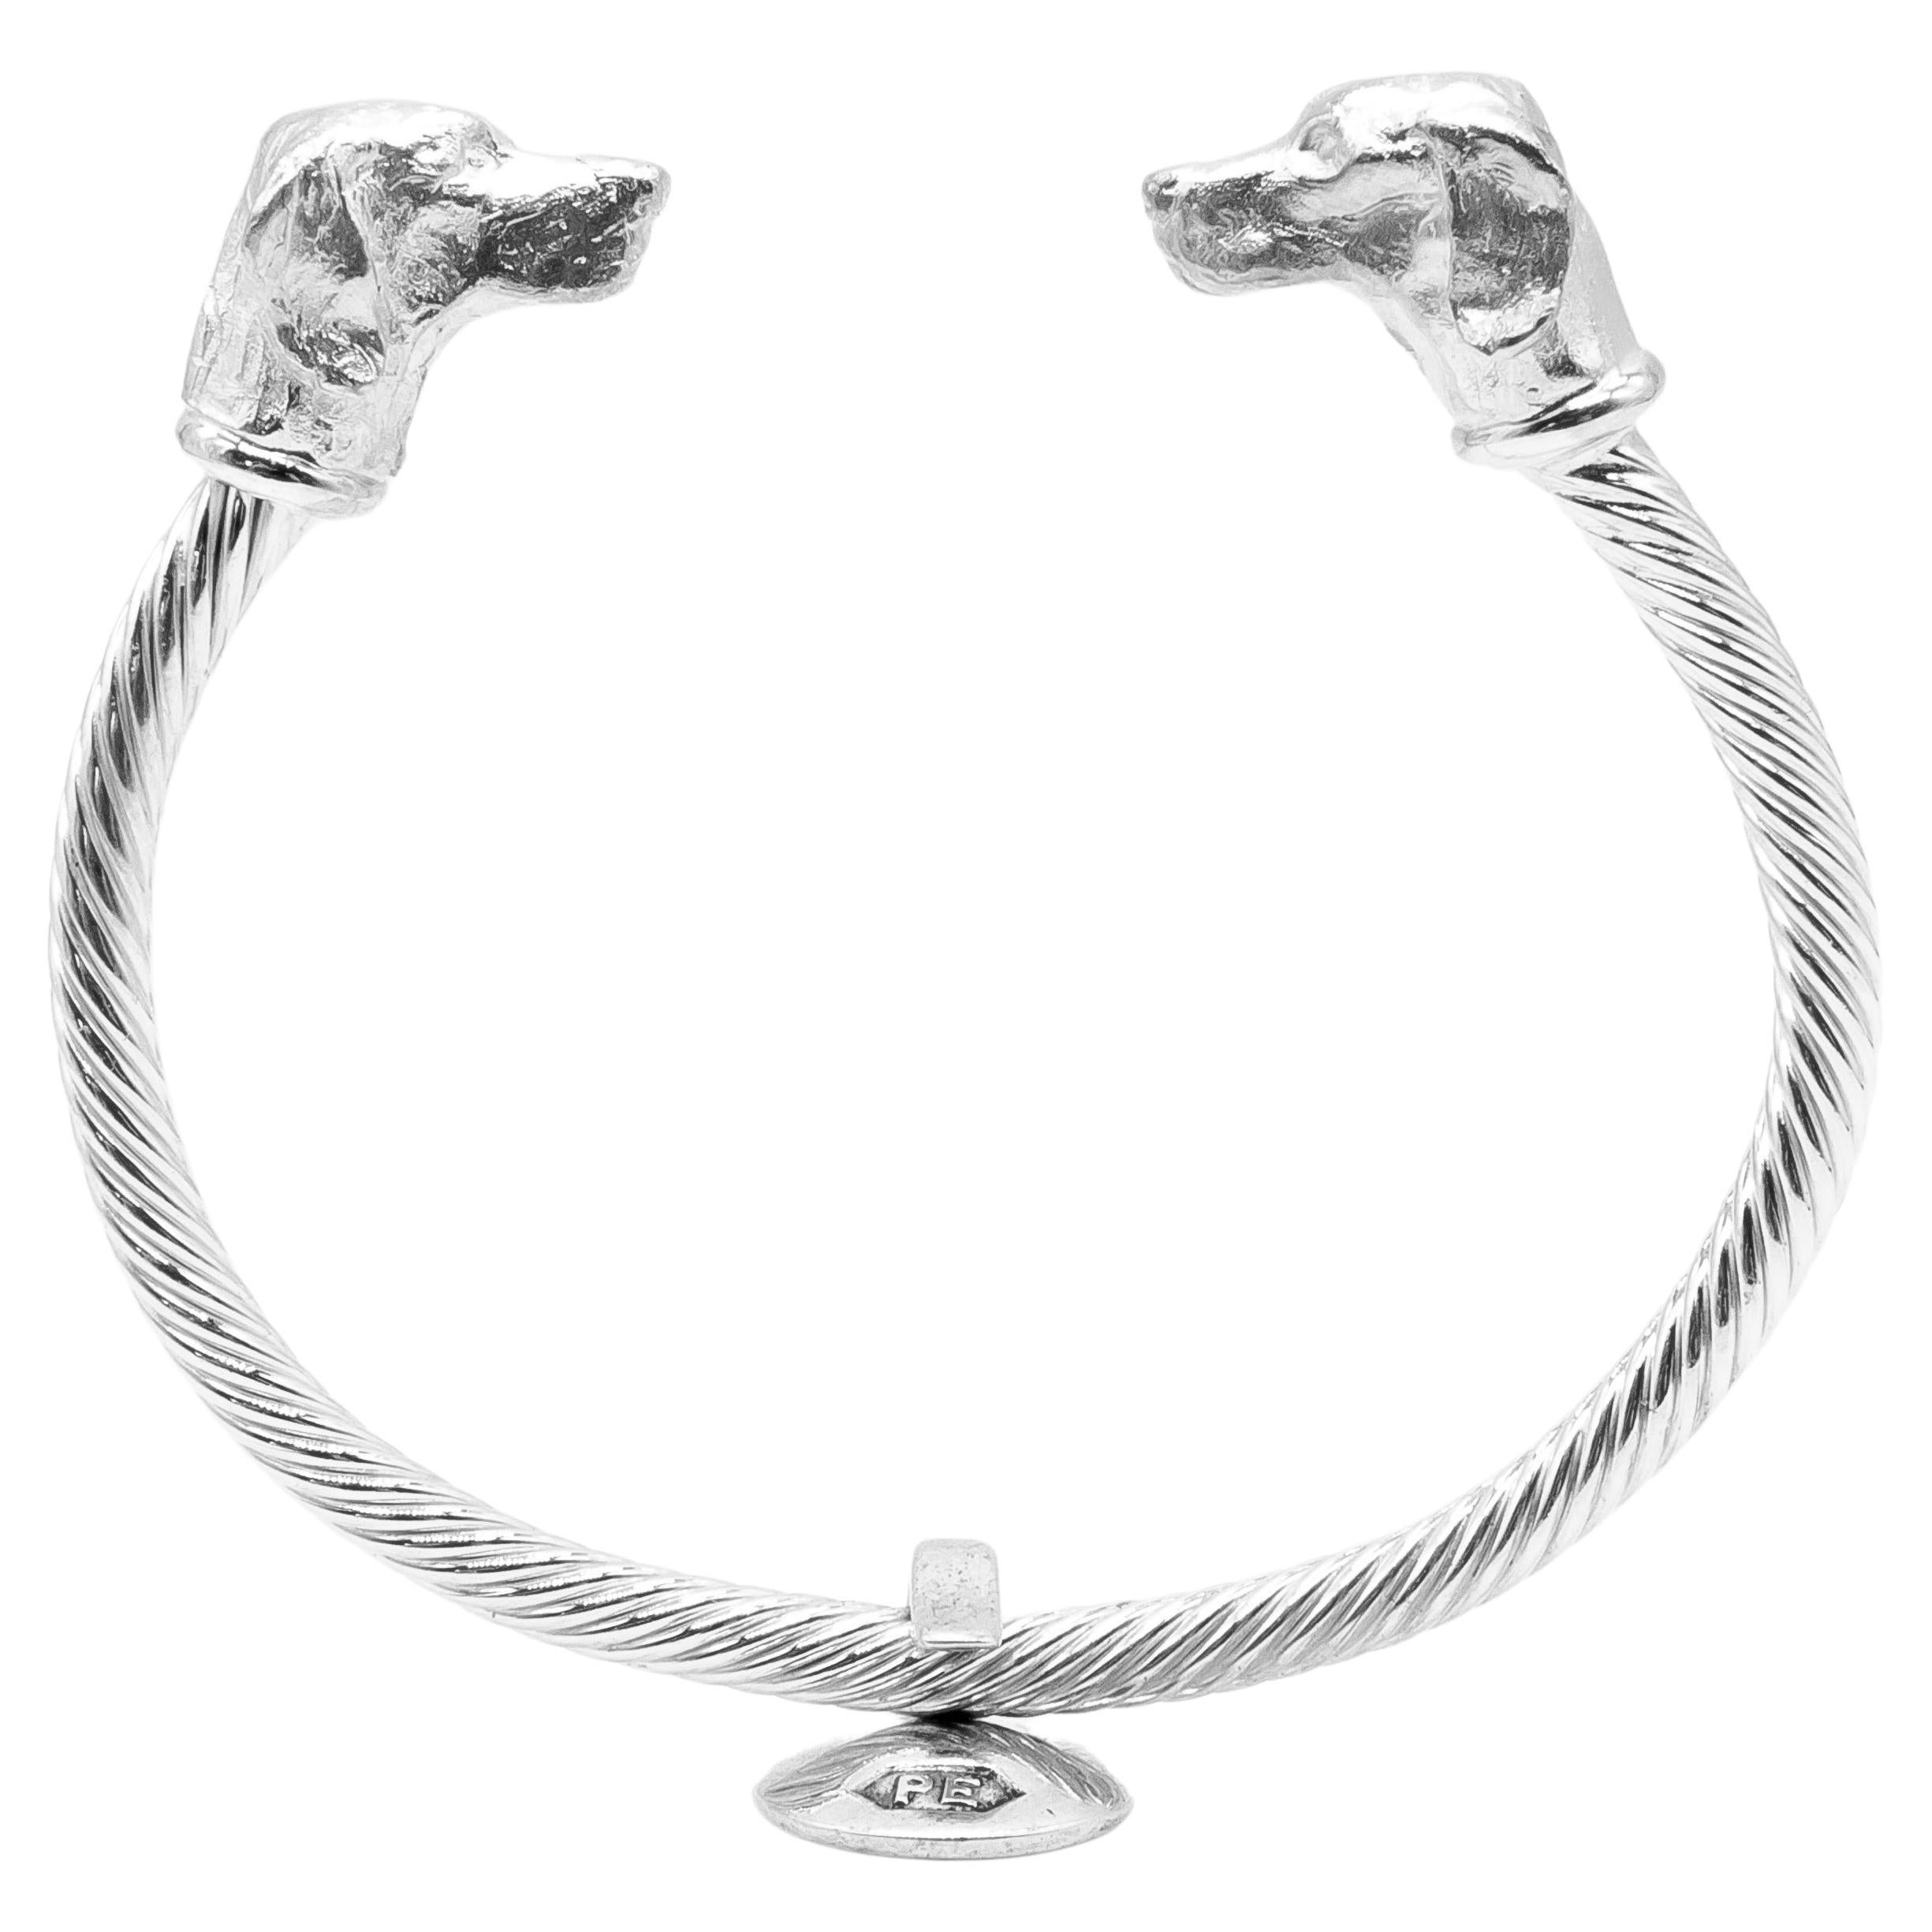 Paul Eaton Sculpted Pointer Dog Heads on Twisted Bangle in Sterling Silver For Sale